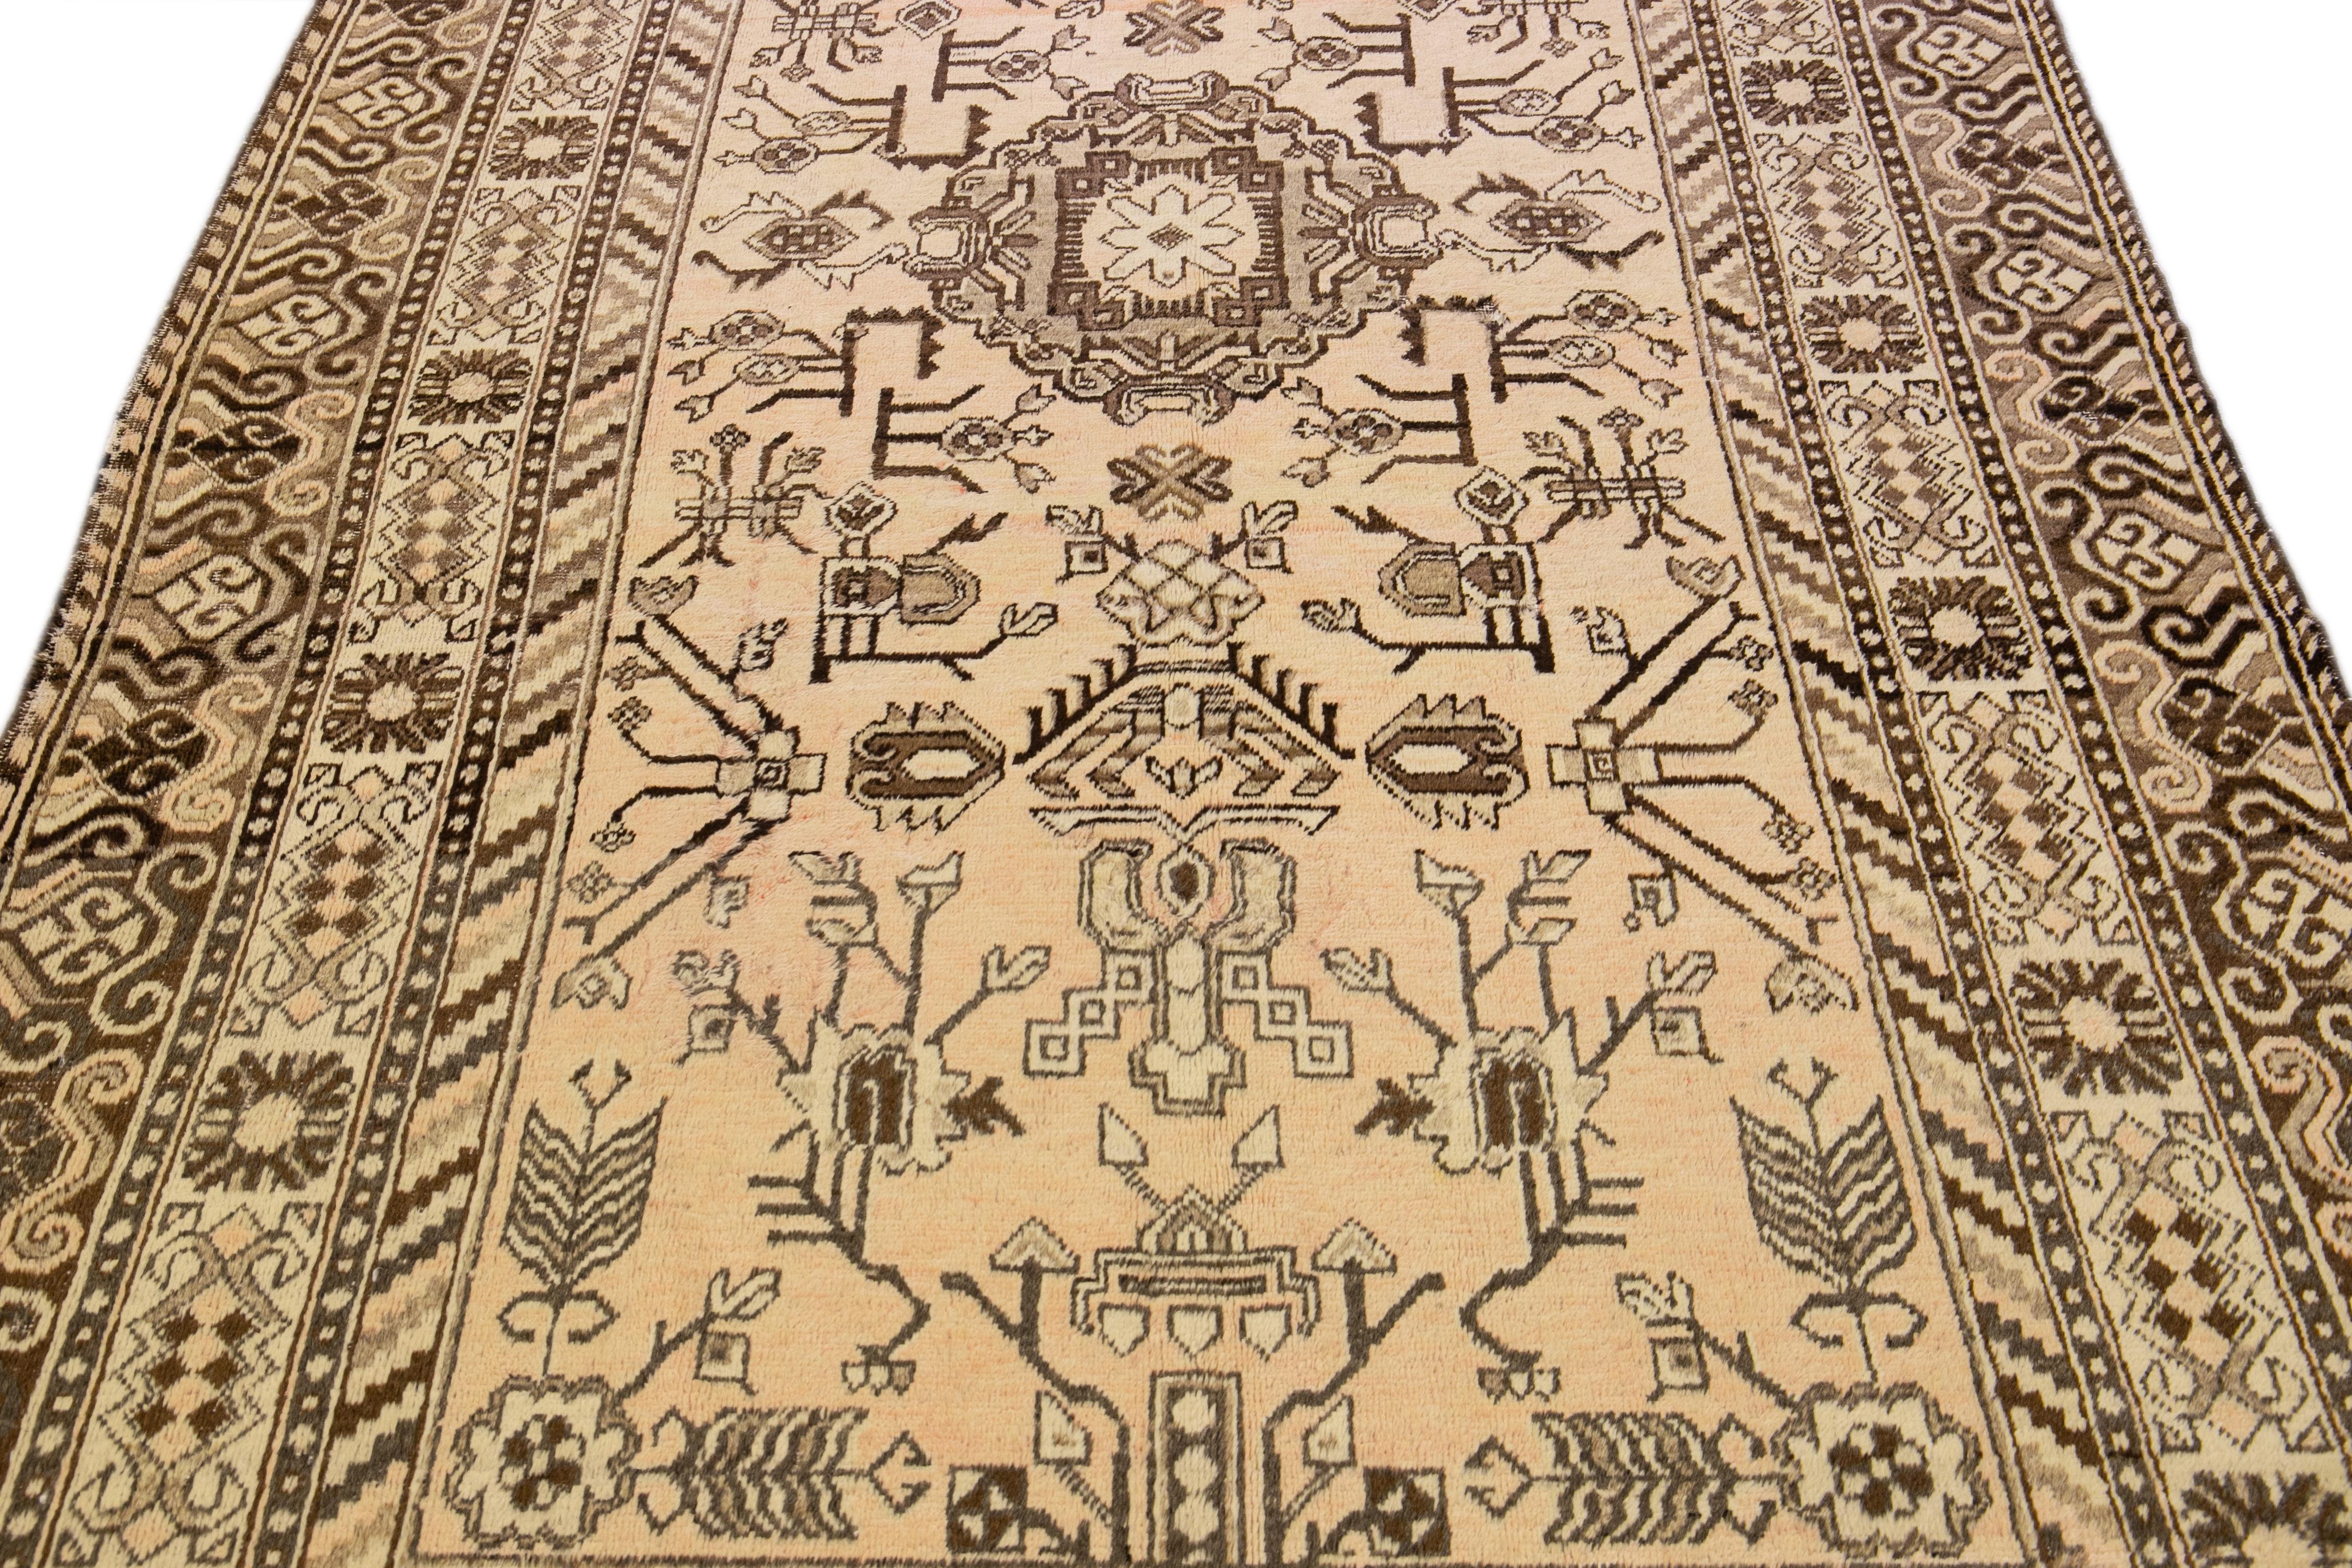 Beautiful antique Karabagh hand-knotted wool rug with beige. This piece has brown accents in an all-over geometric medallion design.

This rug measures: 5'10